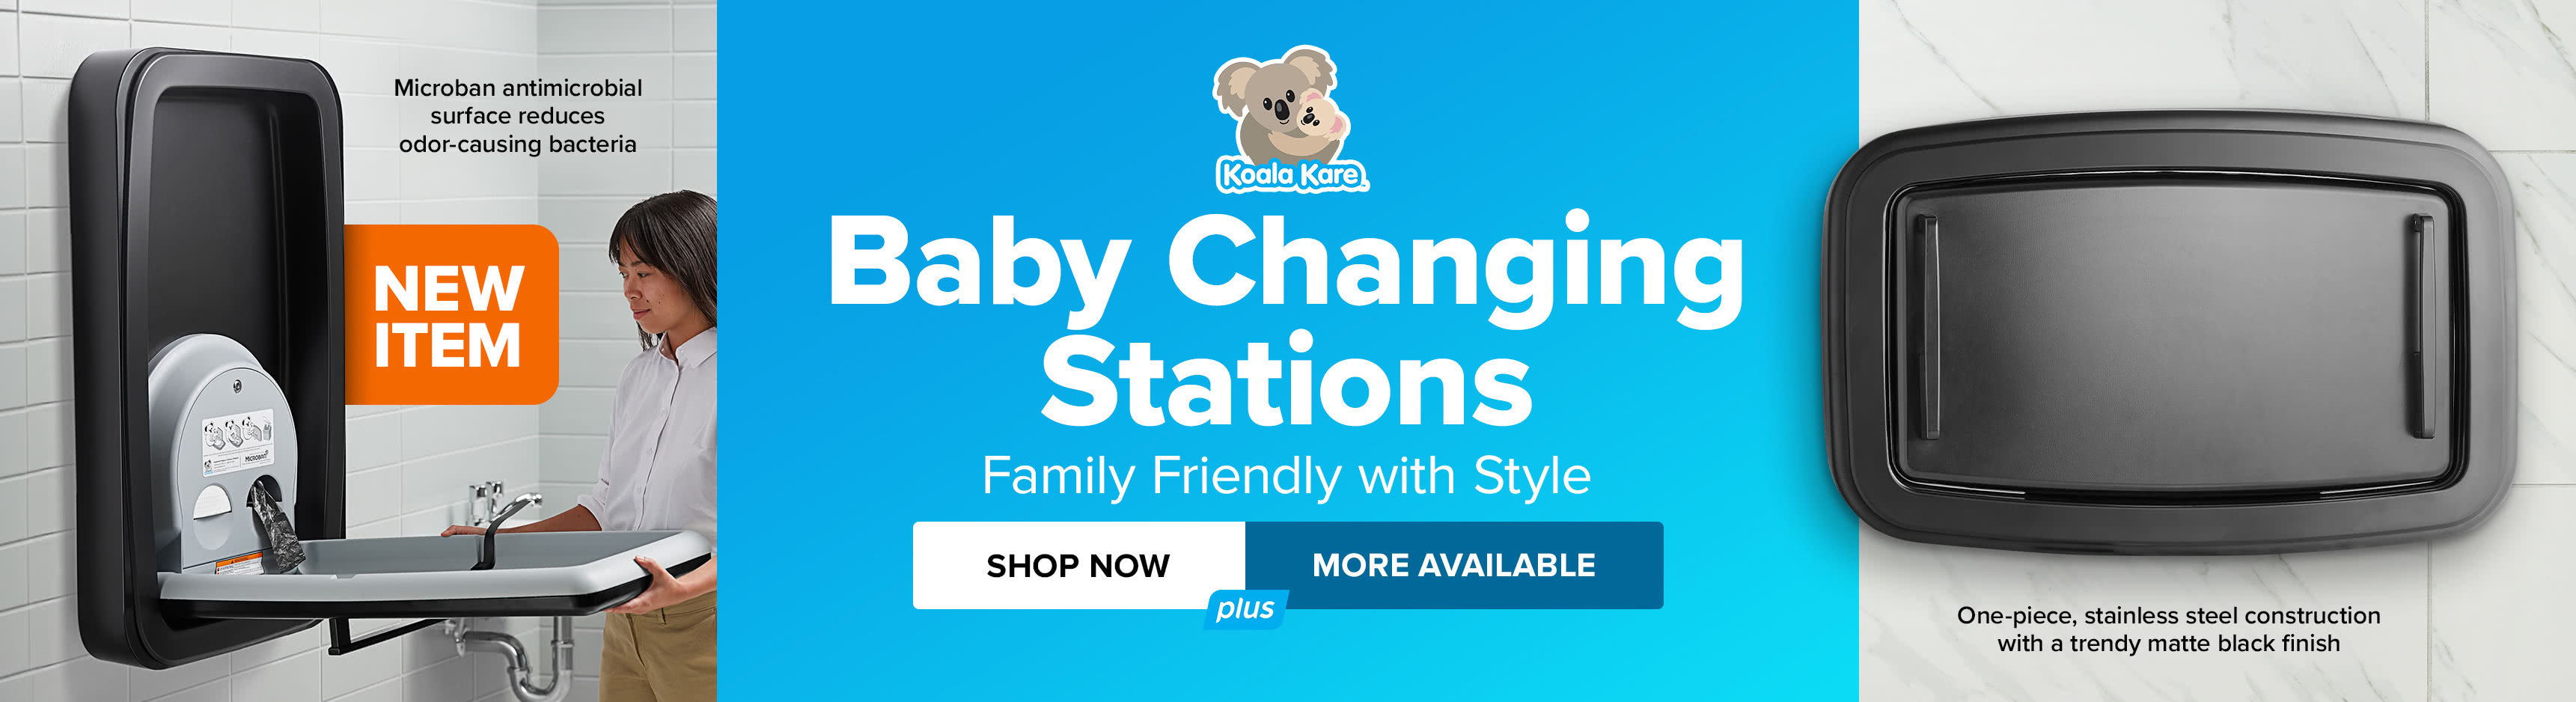 Koala Kare Baby Changing Stations - Family Friendly with Style. Multiple Styles Available Including the NEW Matte Black Stainless Steel Option.